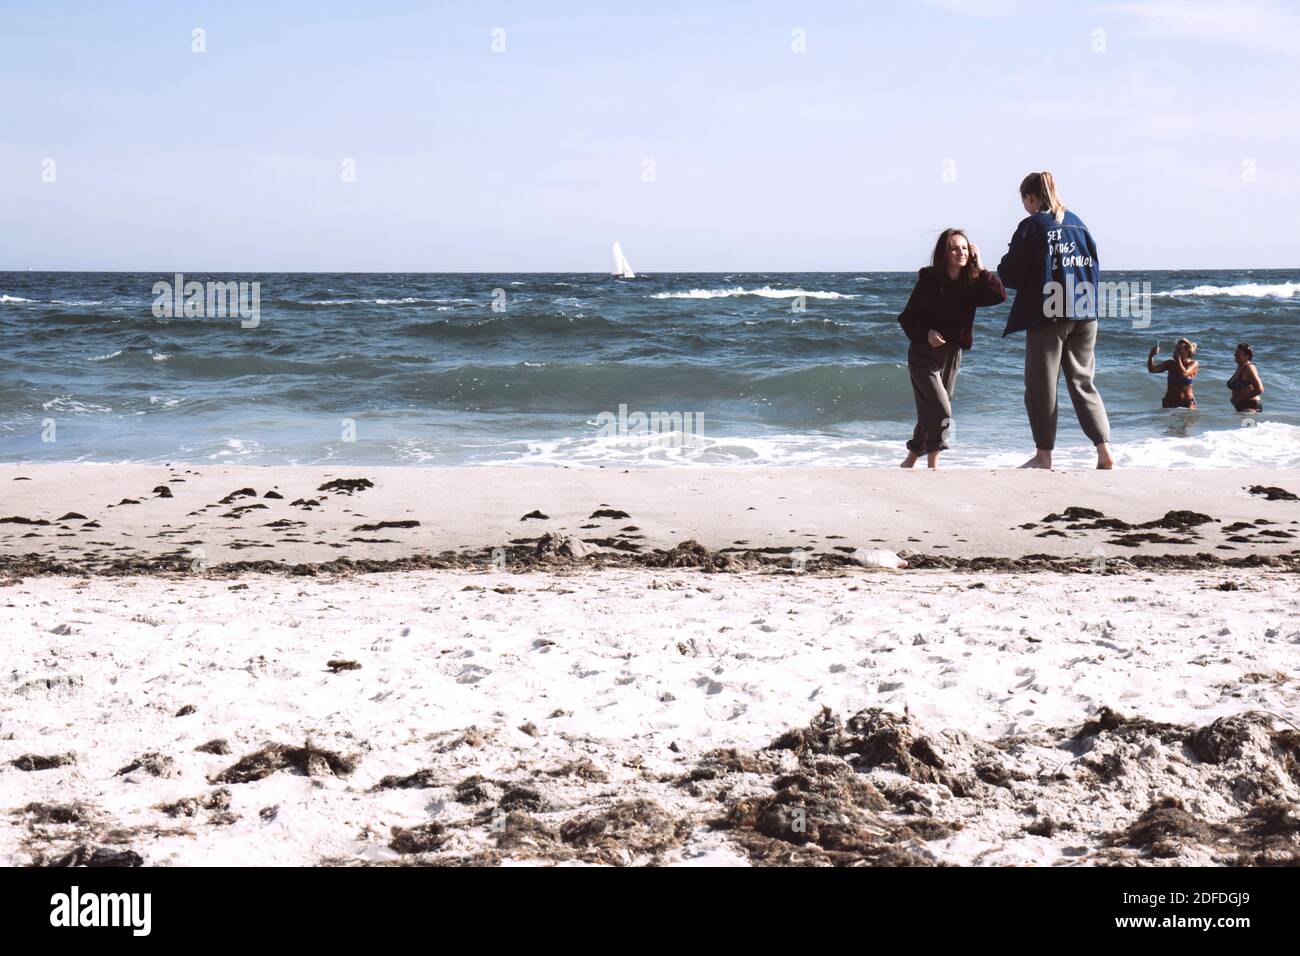 Odessa/Ukraine - October 5, 2020:Summer beach and sea. People on the beach look at the stormy sea, ocean. Beautiful white clouds in the sky Stock Photo